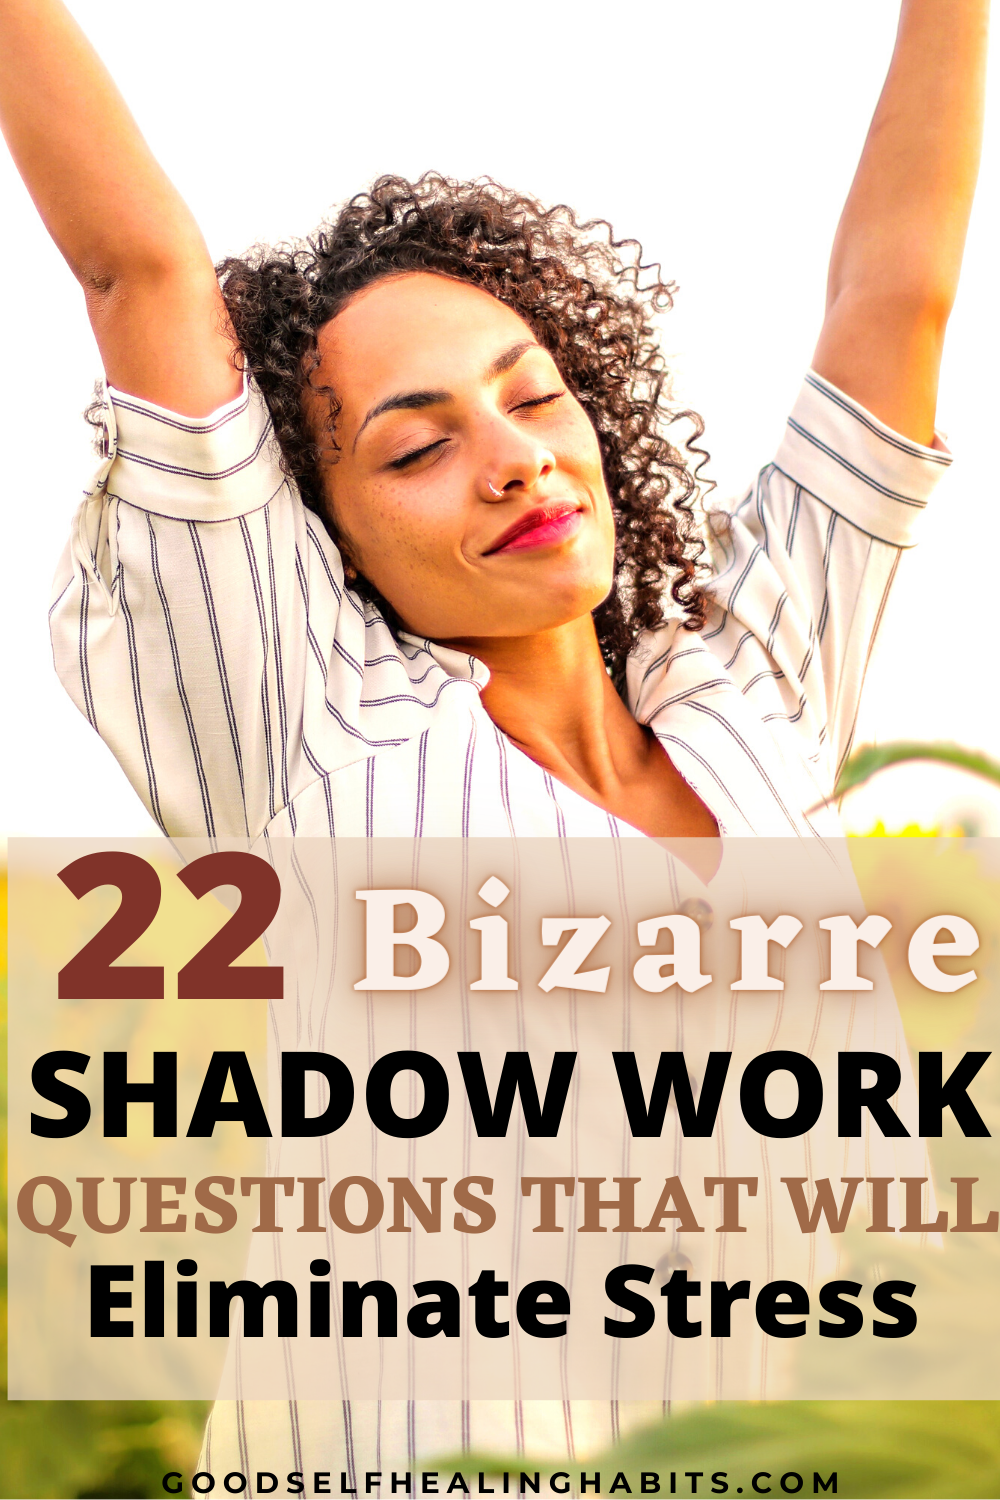 shadow work journal prompts and shadow work questions for healing and relieving stress and anxiety found on goodselfhealinghabits.com